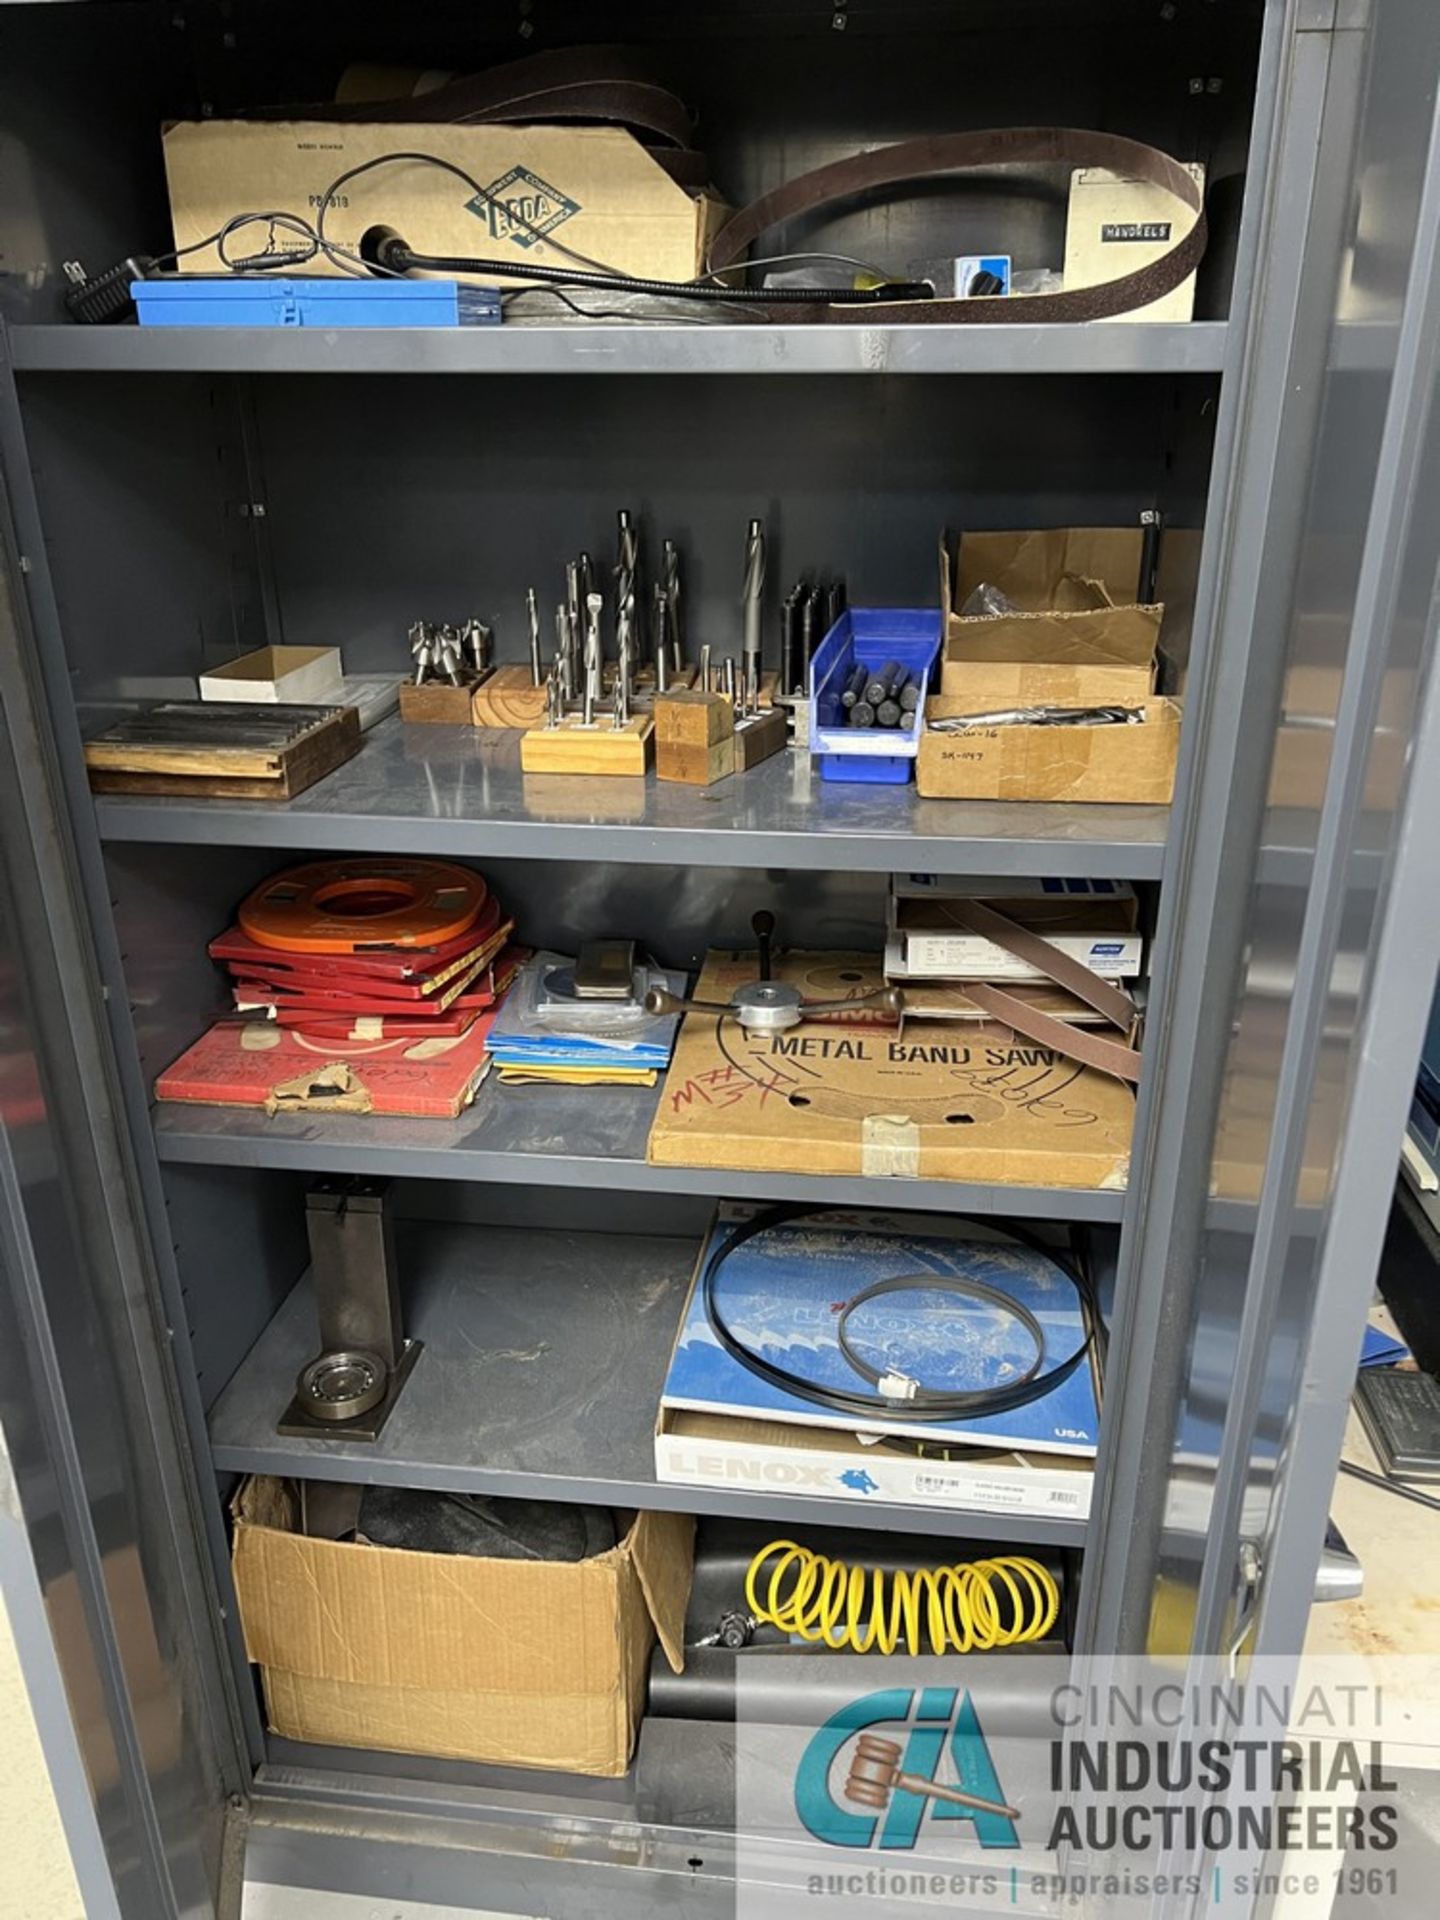 2-DOOR STEEL CABINETS WITH CONTENTS INCLUDING SHIMS, TOOLING, SAW BLADES (MAIN) - Image 2 of 3